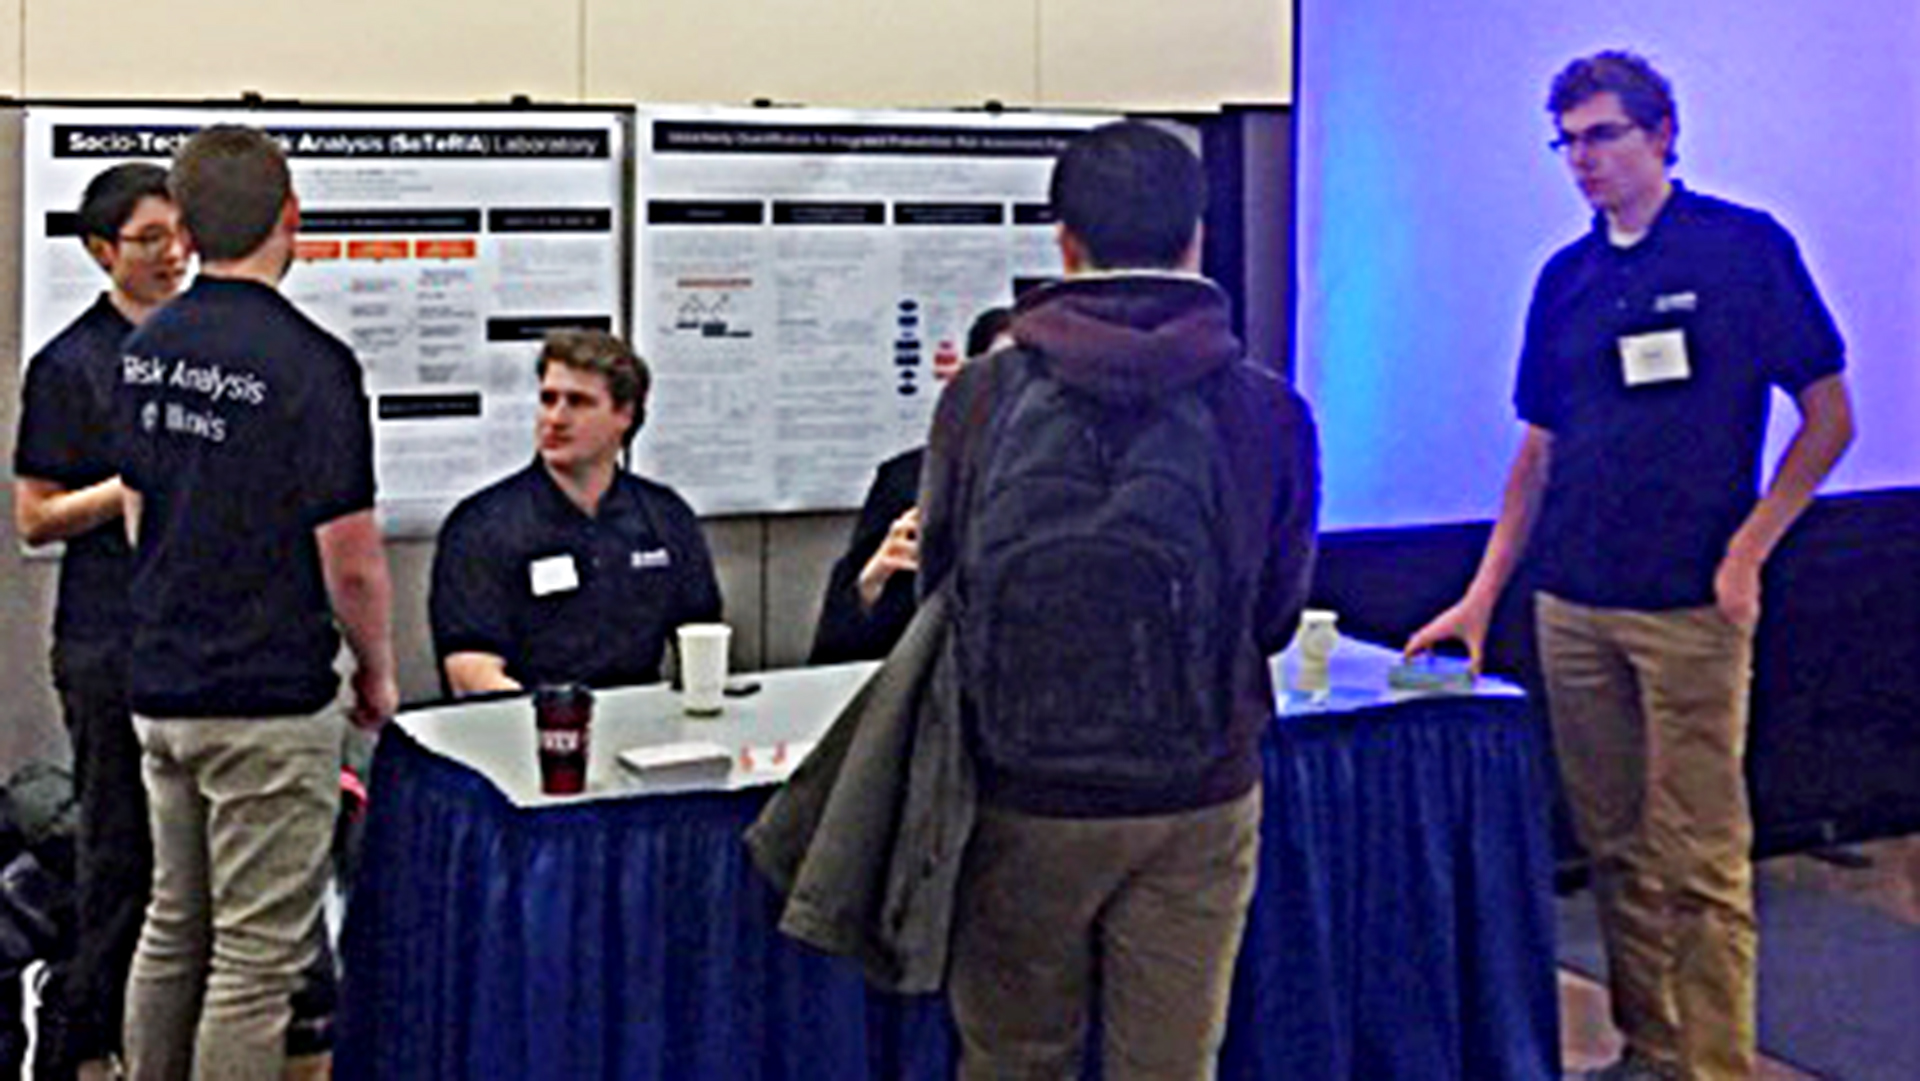 Risk Analysis @ the Engineering Undergraduate Research Resource Fair